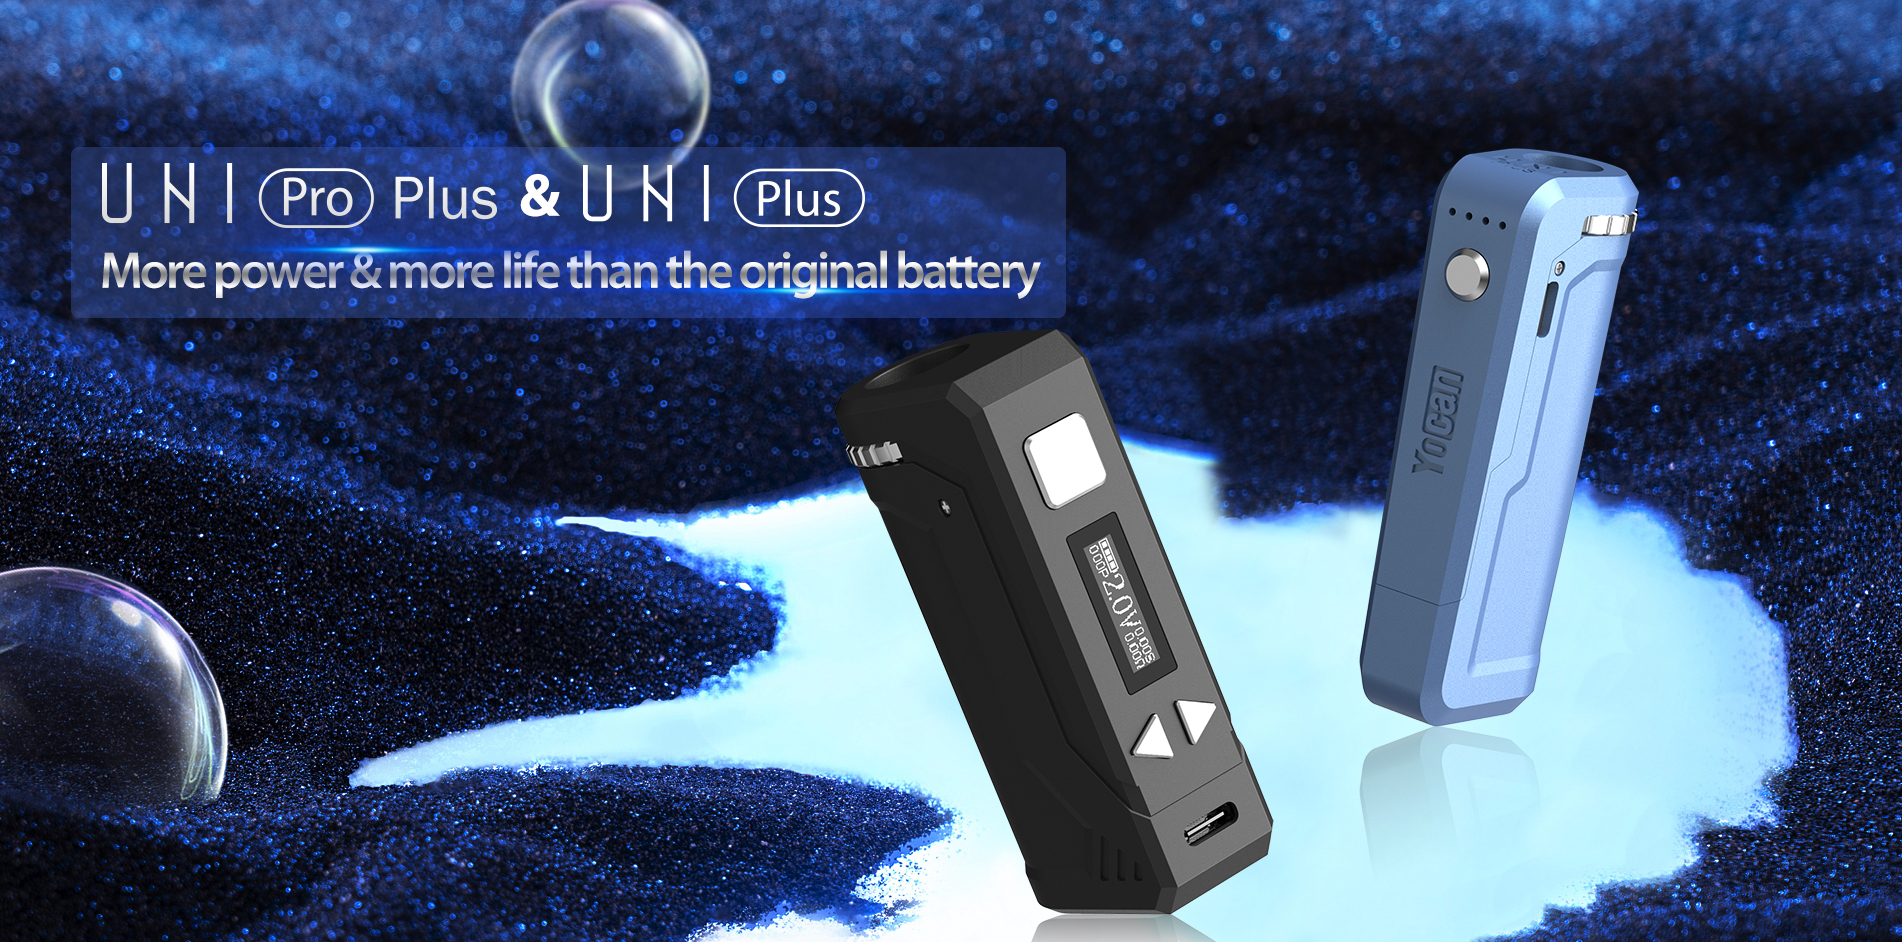 Yocan UNI Pro Plus comes with a 900mAh rechargeable battery, offers more power & more life than the original battery.